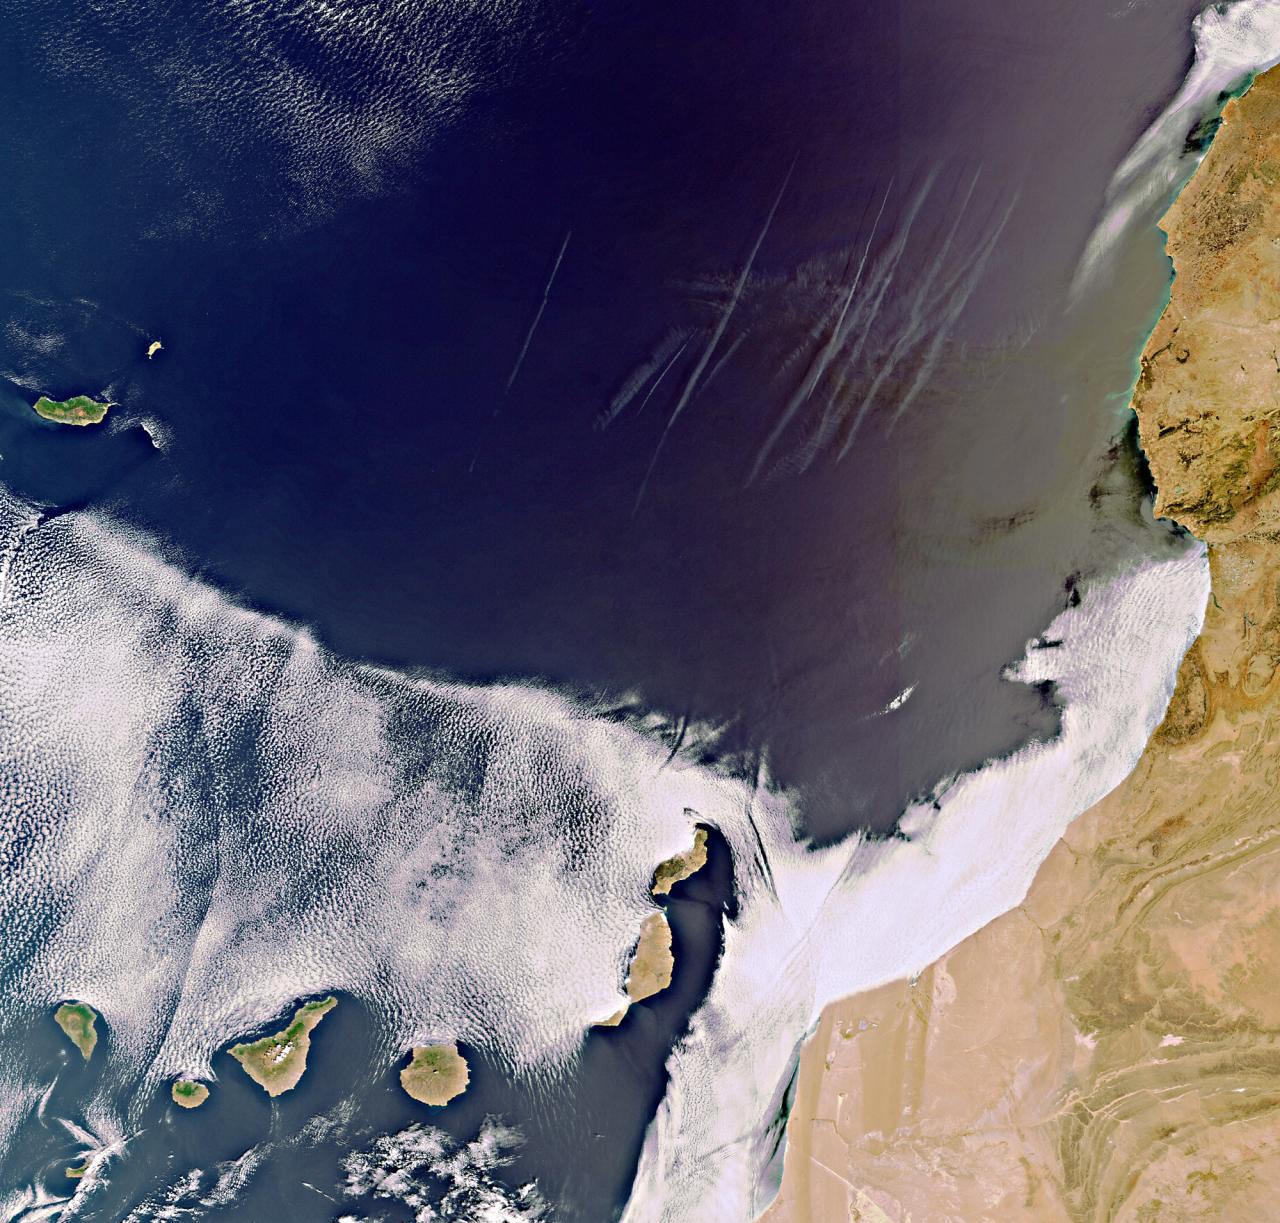 The subtropical Canary Islands off Africa’s west coast are pictured in this image, acquired on 8 September 2011 by Envisat’s Medium Resolution Imaging Spectrometer (MERIS). To the north, multiple contrails can be seen over the dark blue water. To the east